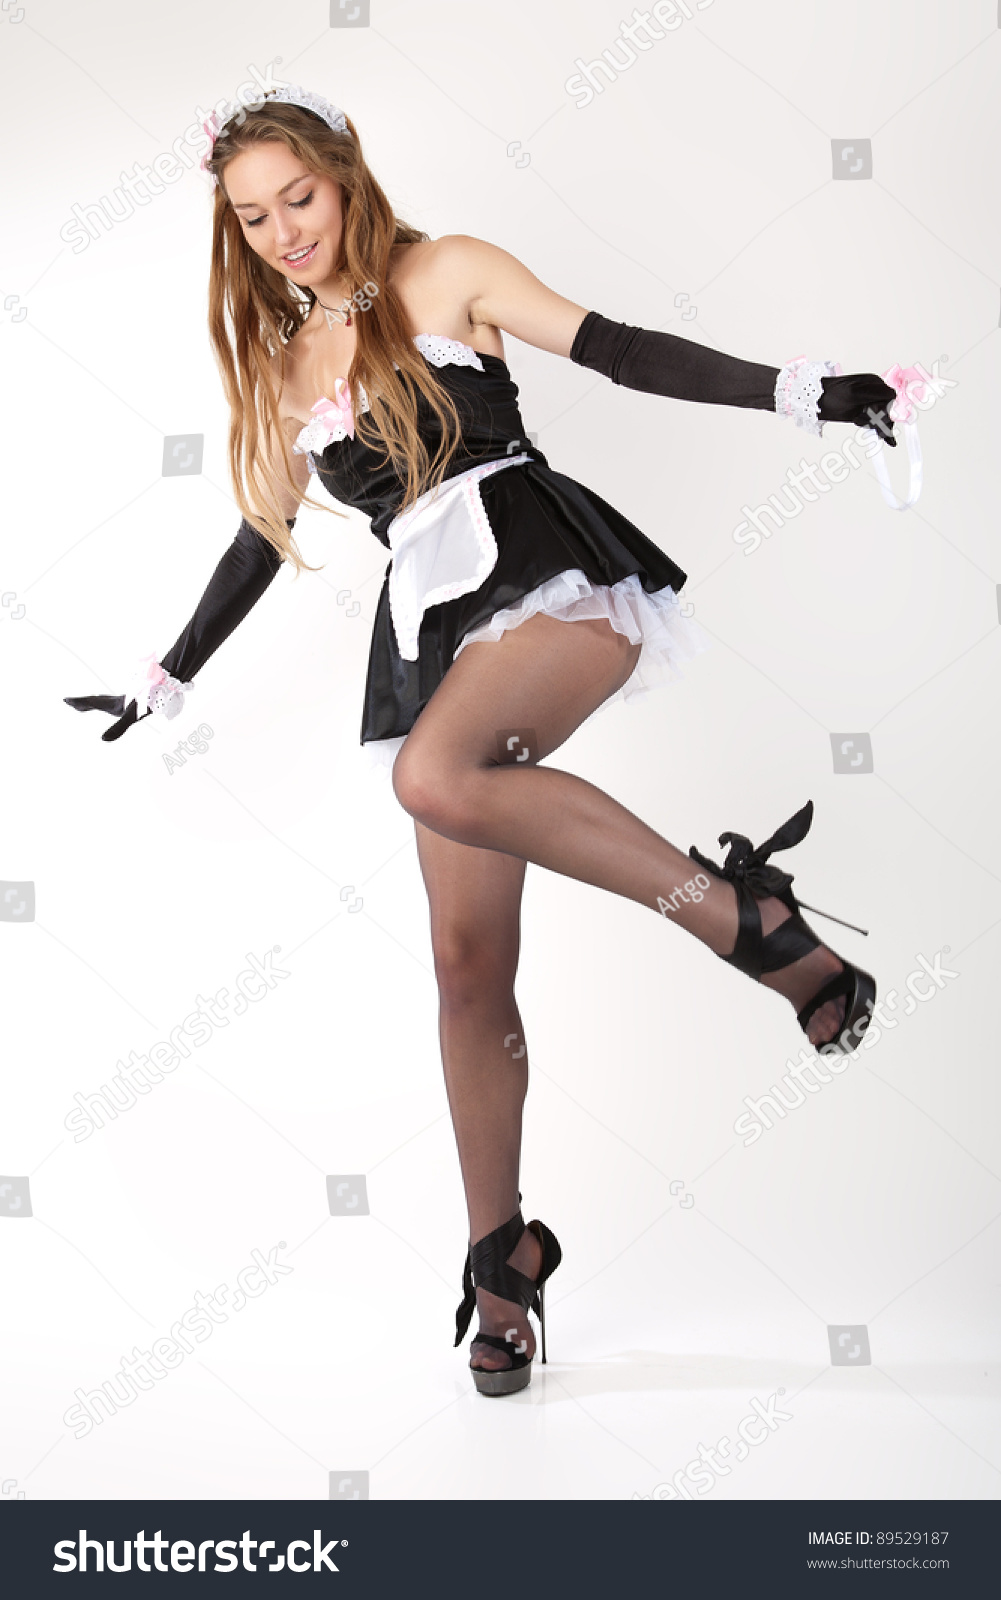 Sexy French Maid Stock Photo 89529187 Shutterstock